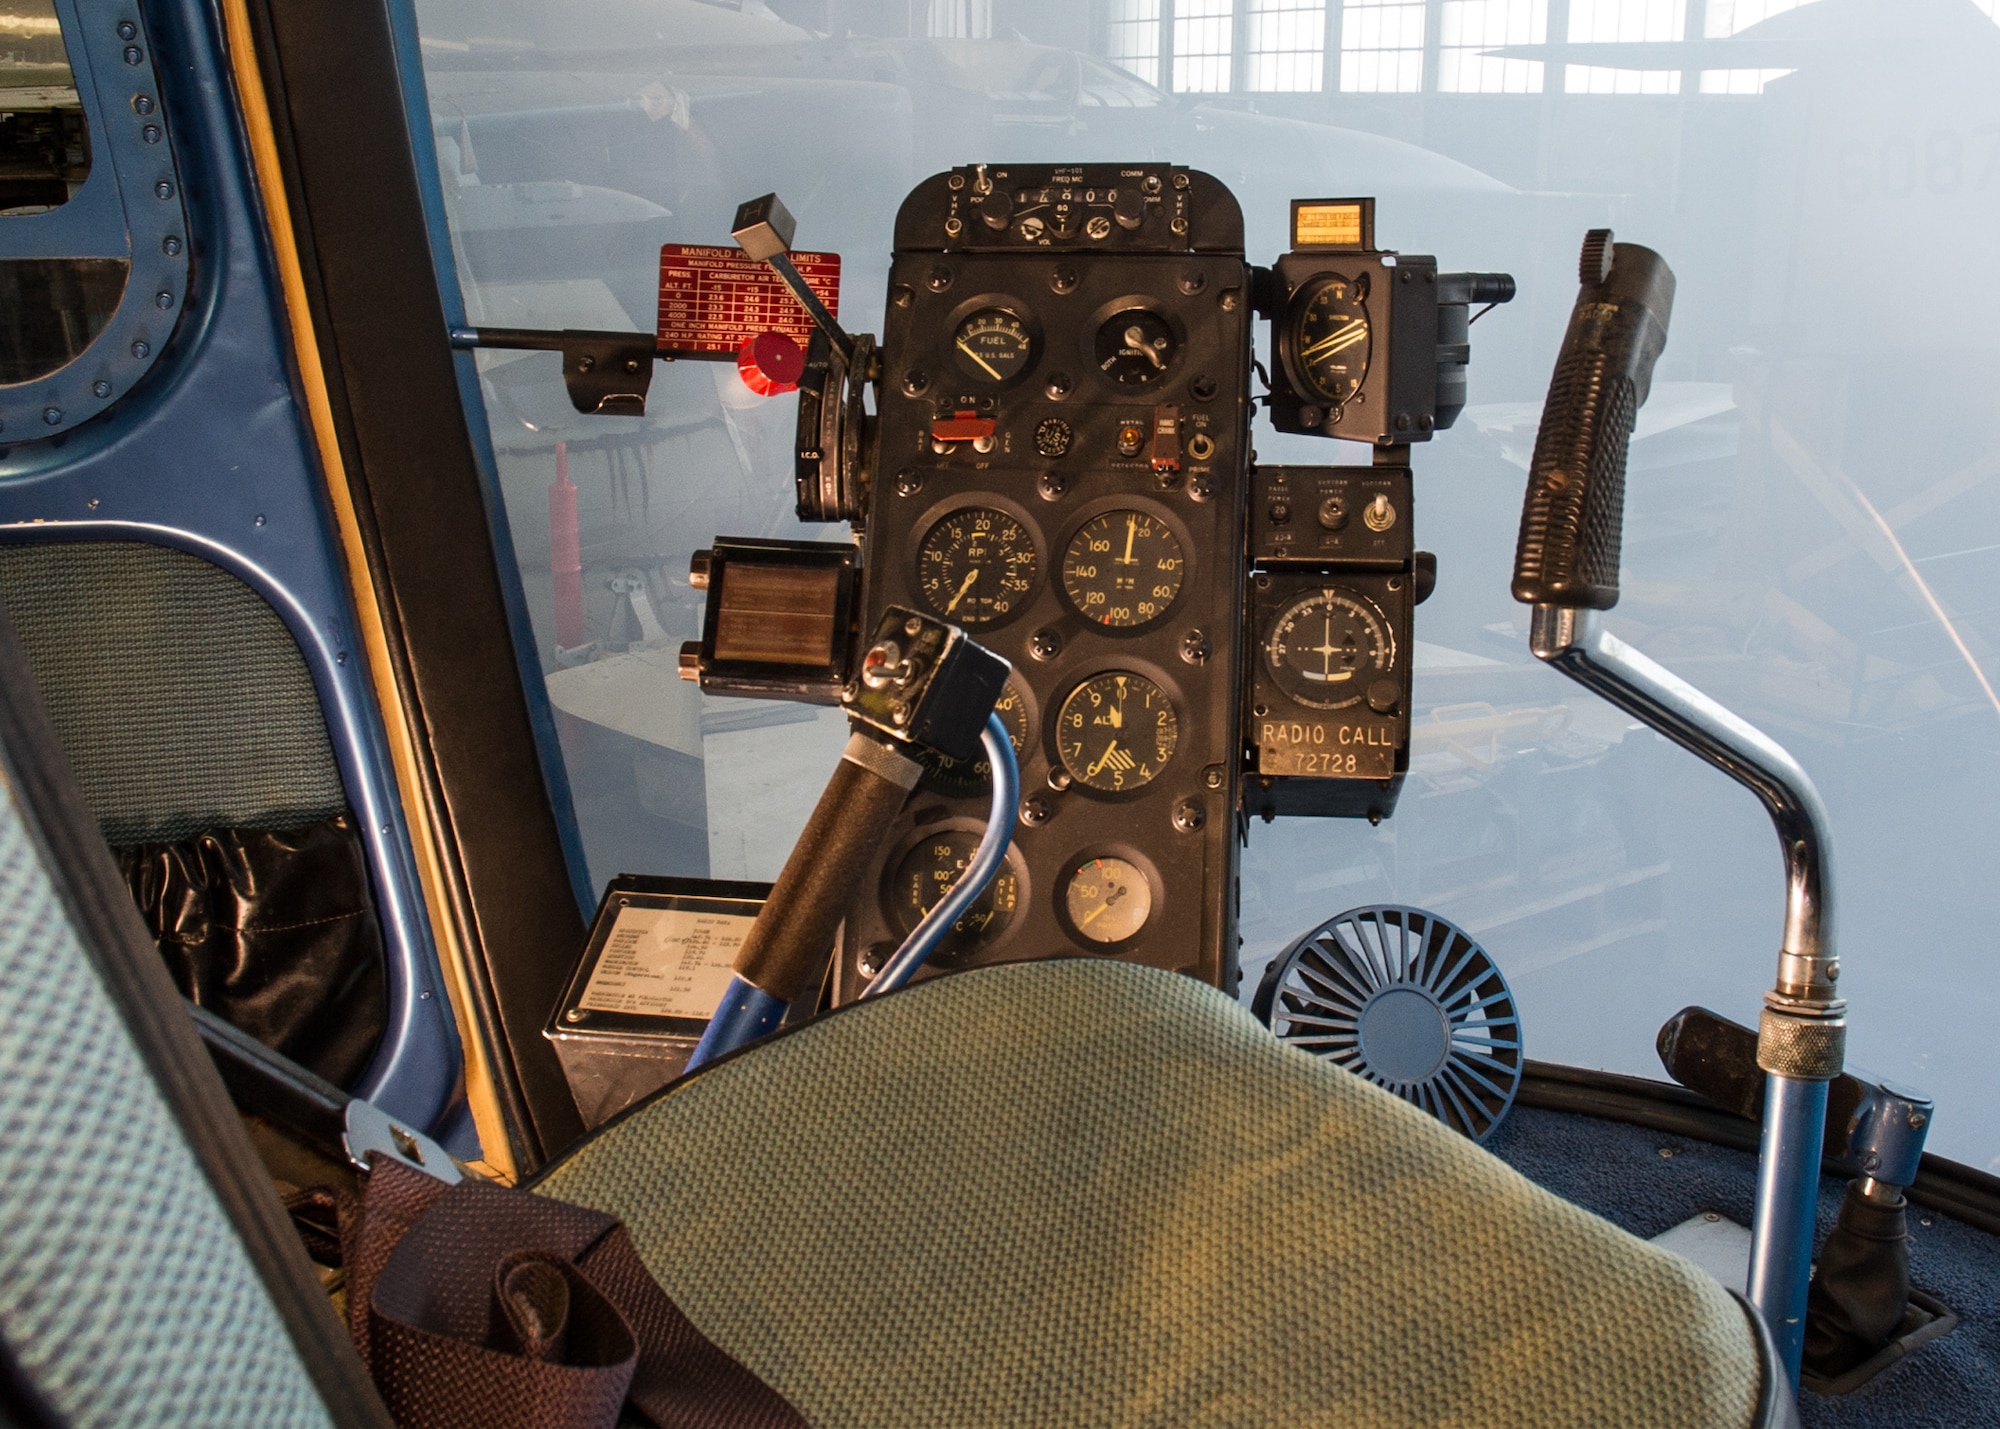 DAYTON, Ohio -- Bell UH-13J Sioux cockpit view in the Presidential Gallery at the National Museum of the United States Air Force. (U.S. Air Force photo by Ken LaRock)